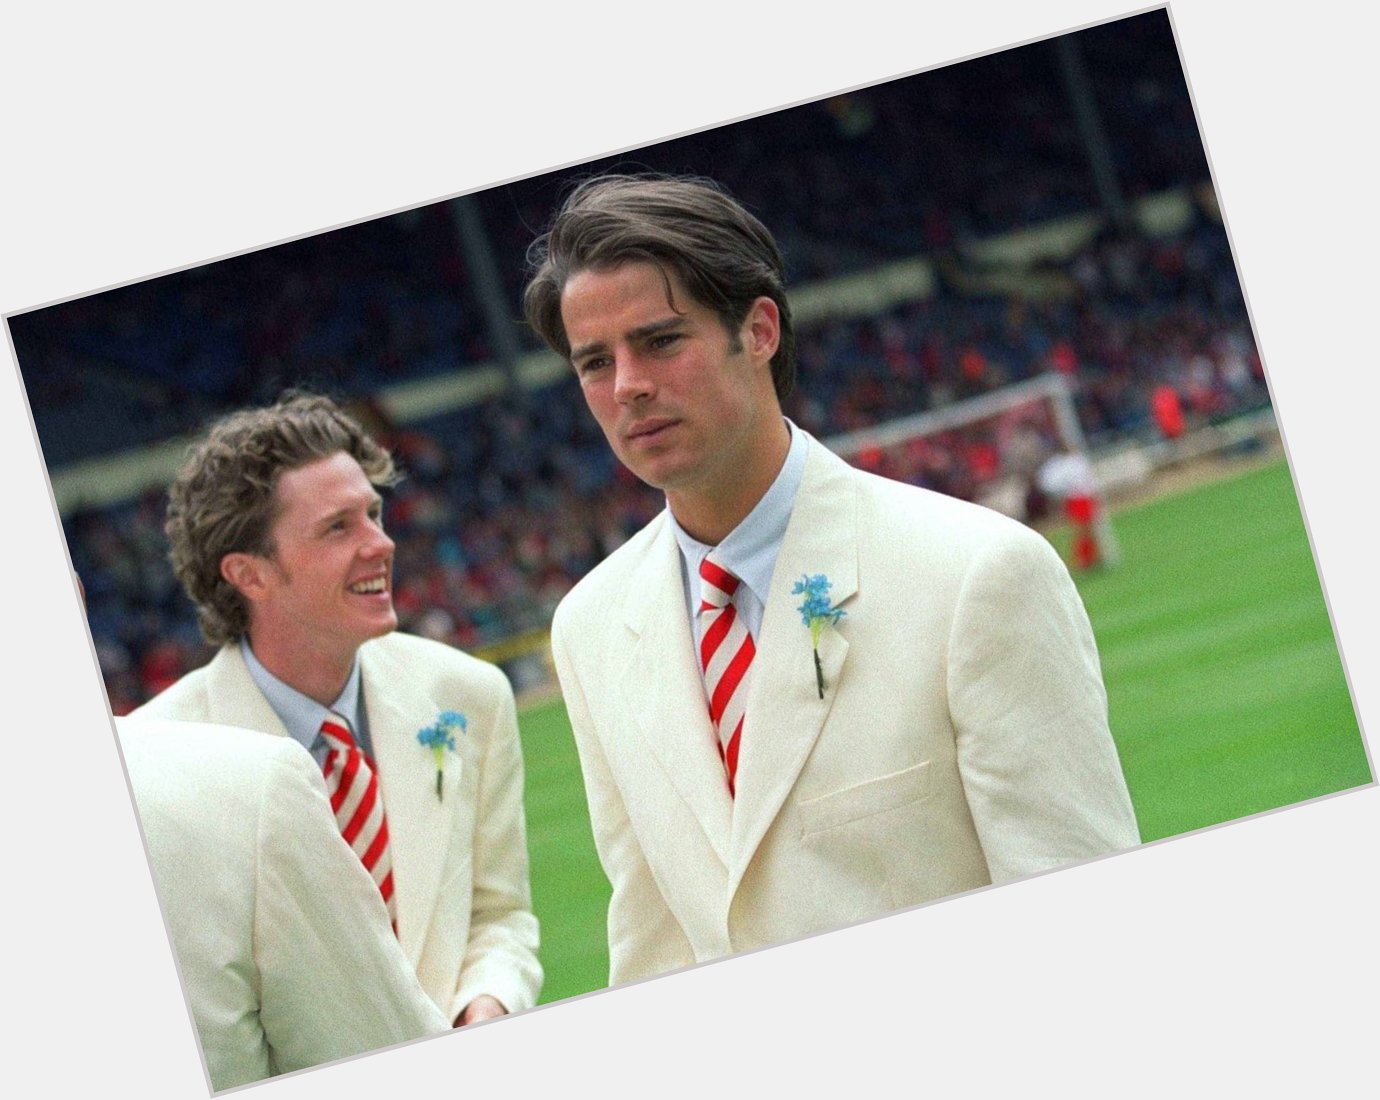 Happy Birthday to former Liverpool, Tottenham and England legend Jamie Redknapp. Still love those suits! 